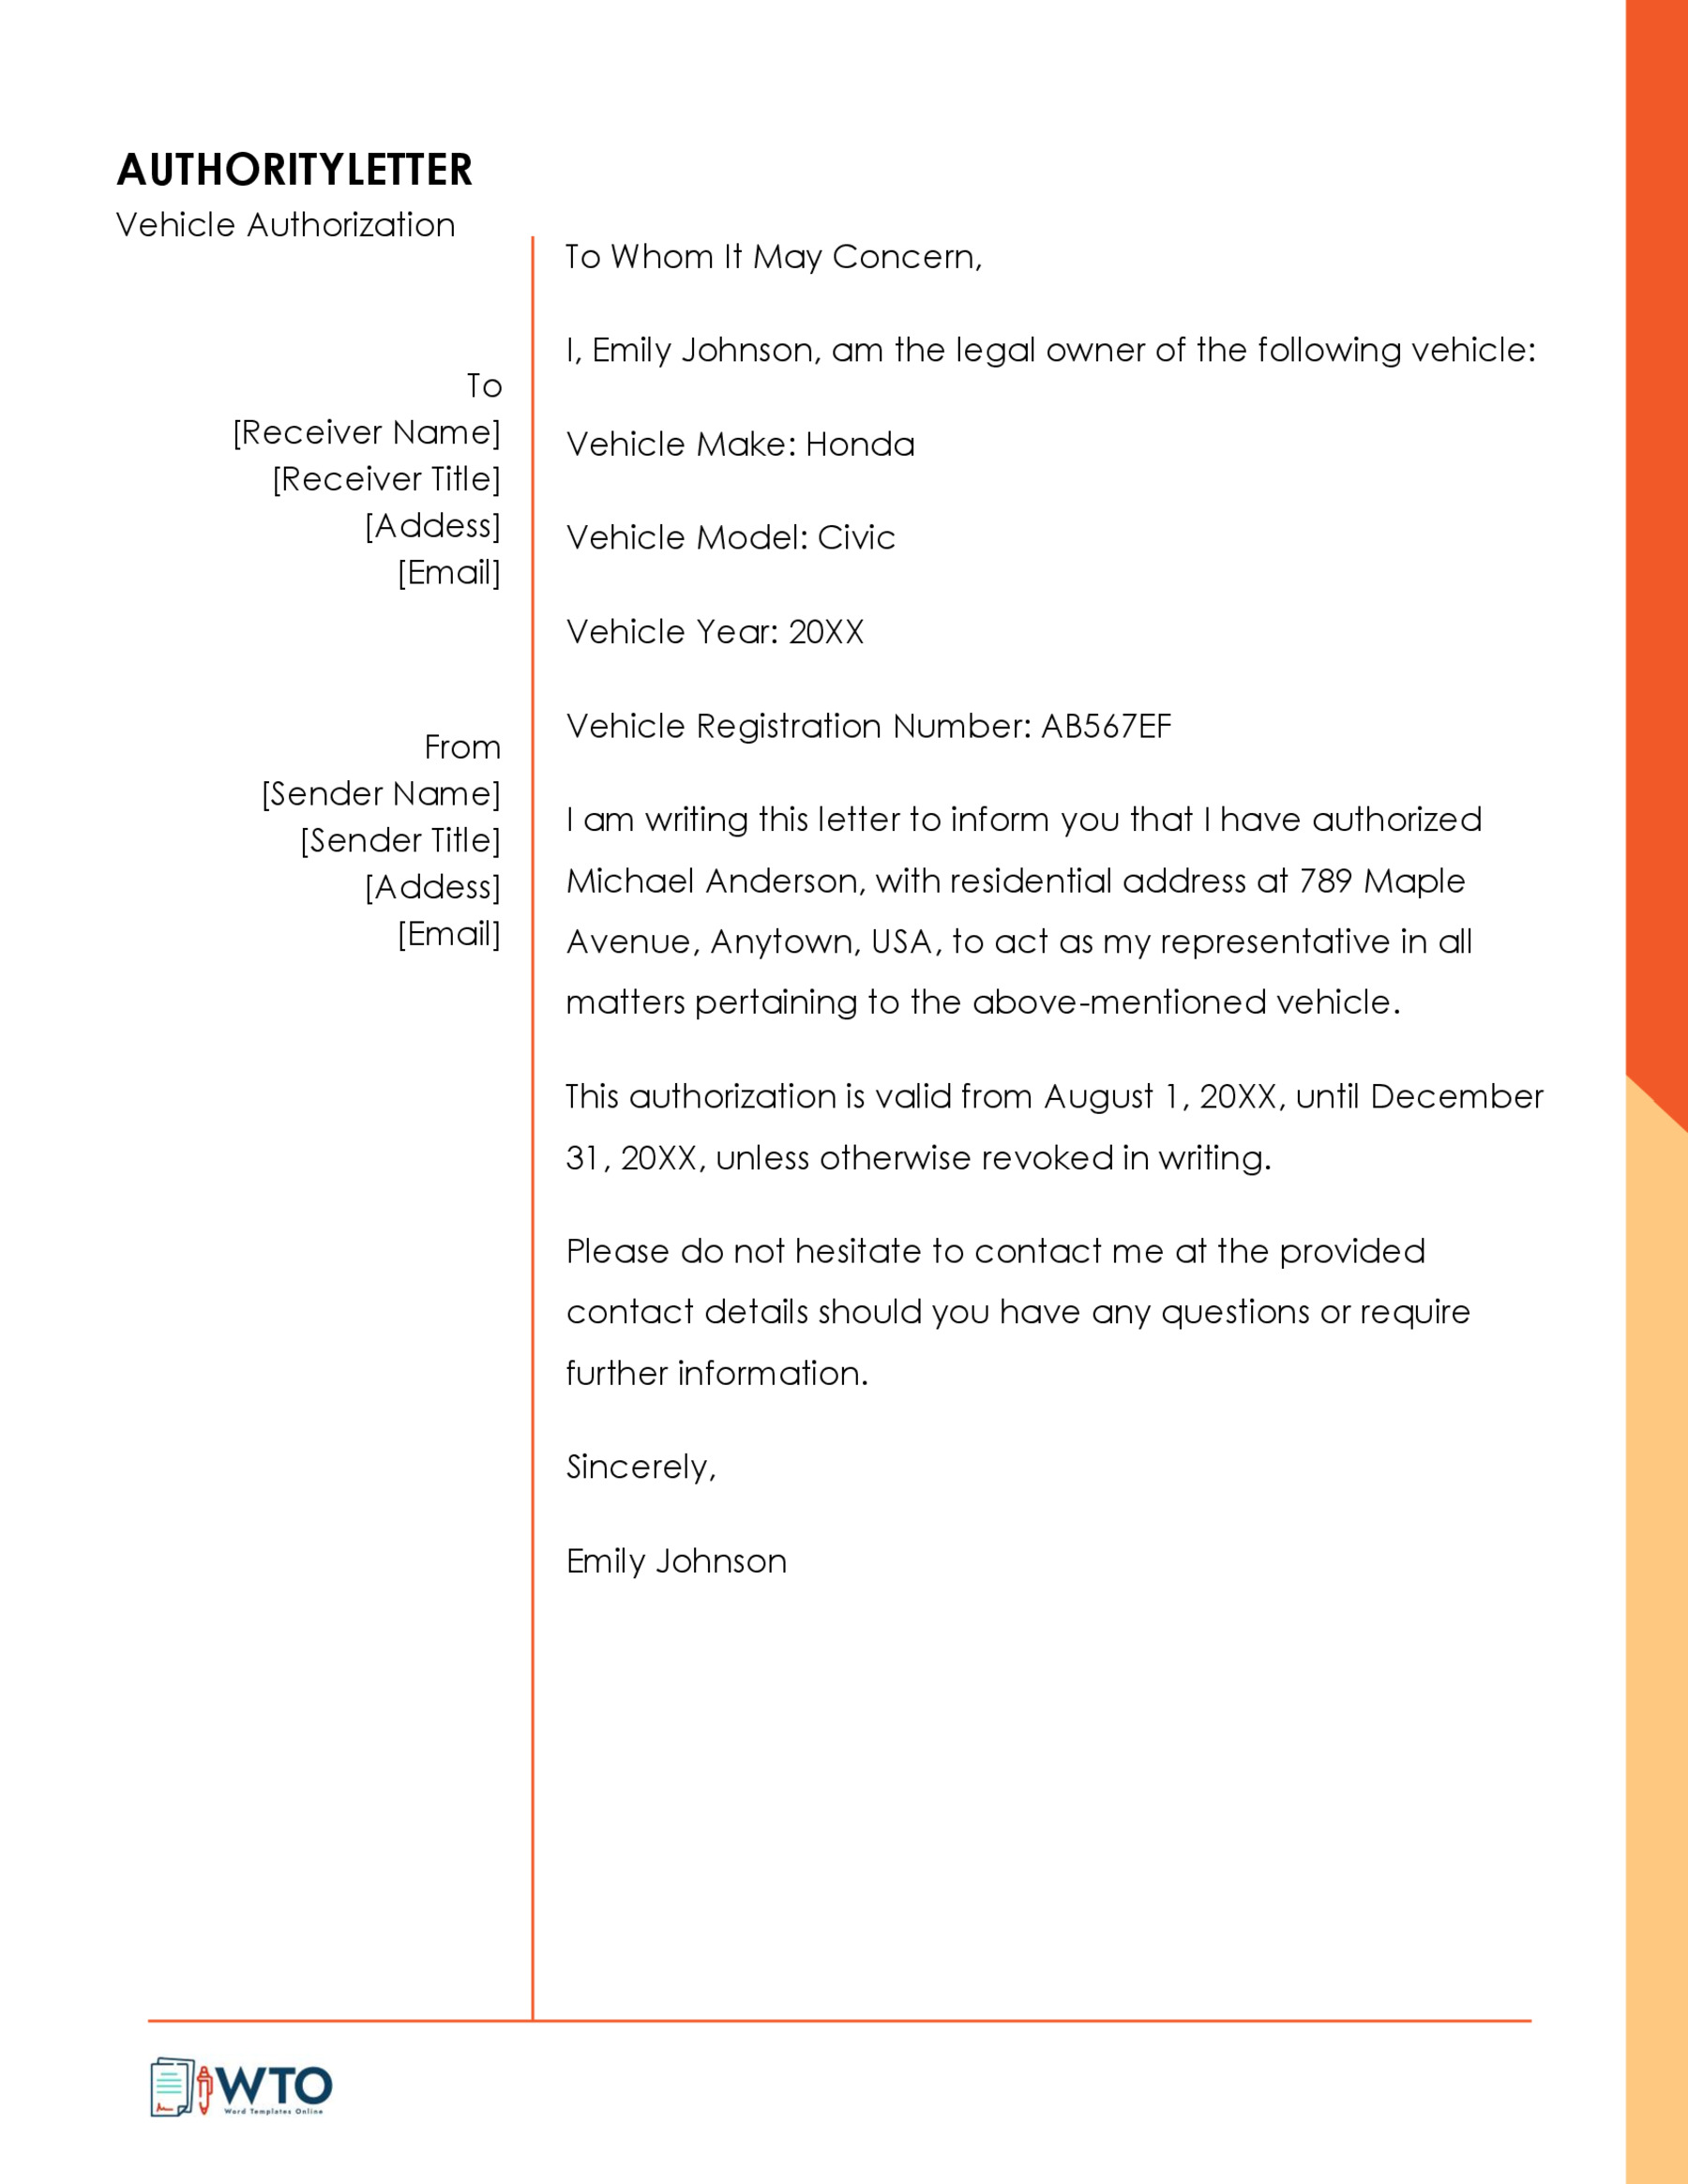 Vehicle Authorization Letter Sample Free download